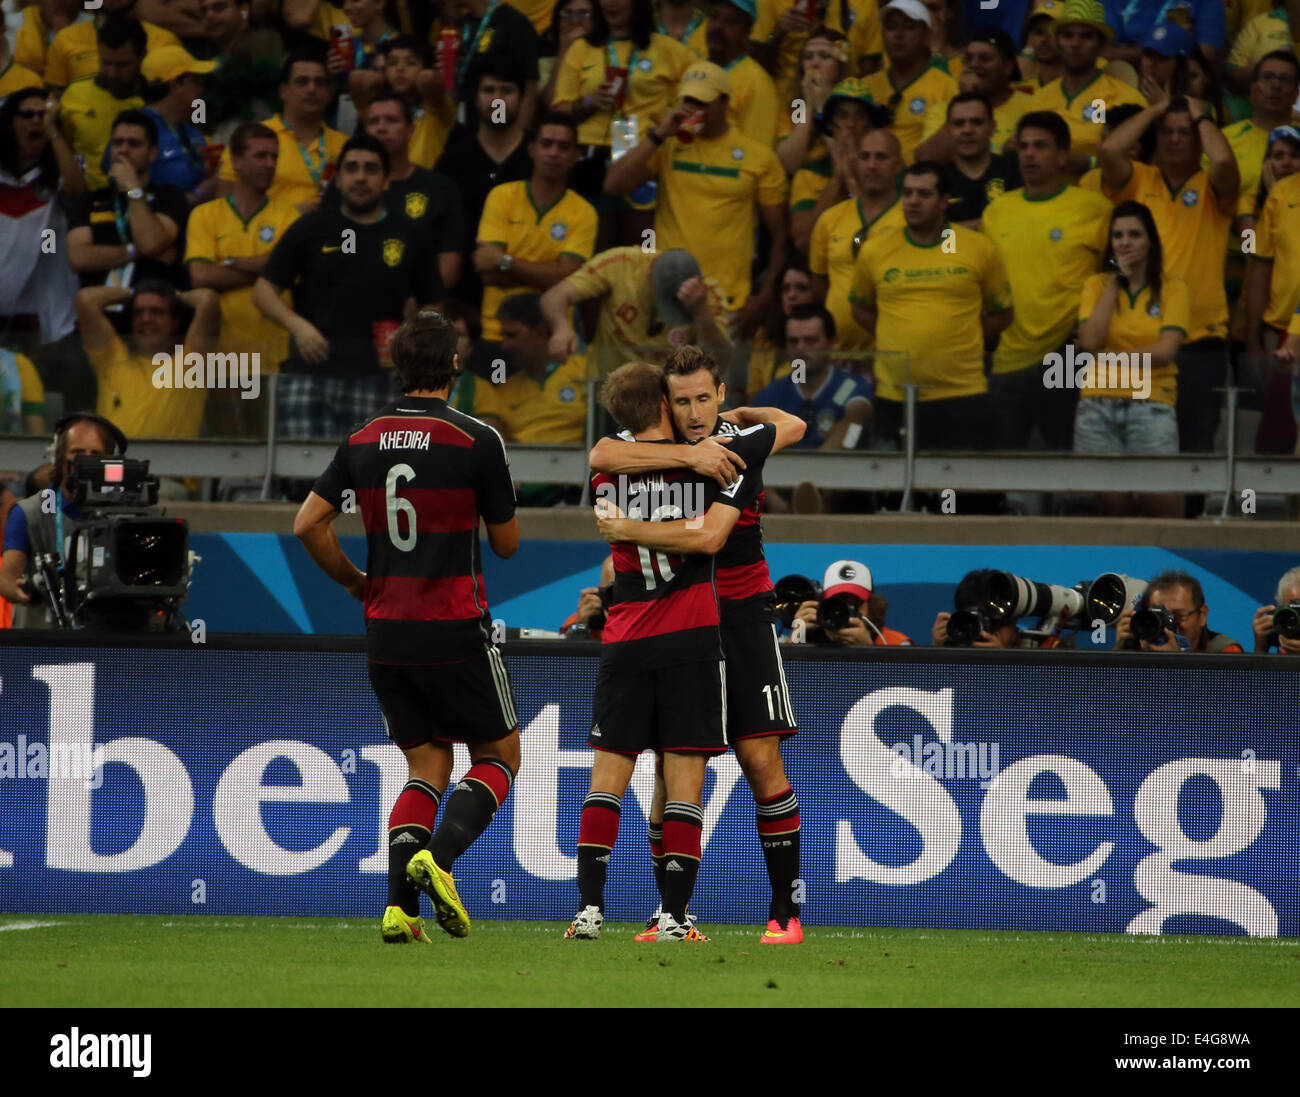 08.07.2014. Estadio Mineirao, Belo Horizonte, Brazil. FIFA World Cup 2014 semi-final soccer match between Brazil and Germany at Estadio Mineirao. Klose celebrates with Lahm after his goal and sets a new world cup record for goals scored Stock Photo